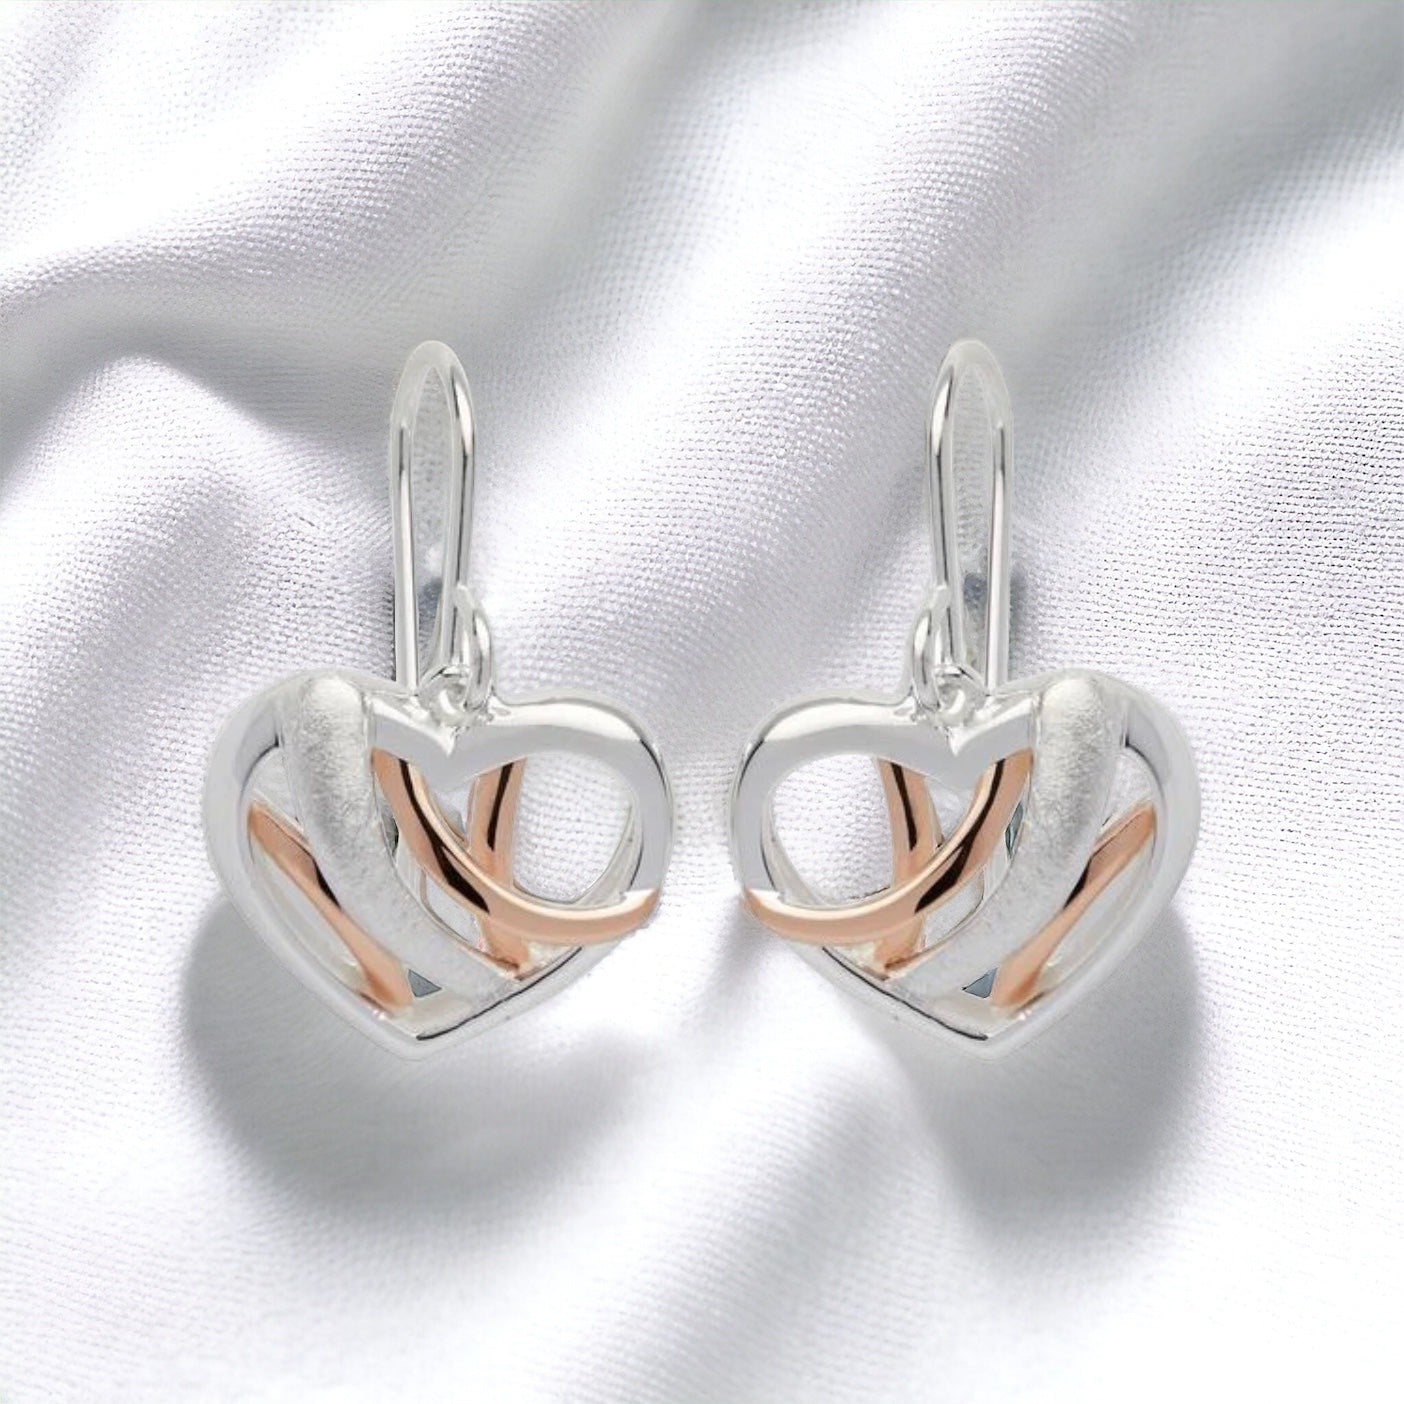 Unique & Co Sterling Silver Heart Earrings With Rose Gold Elements